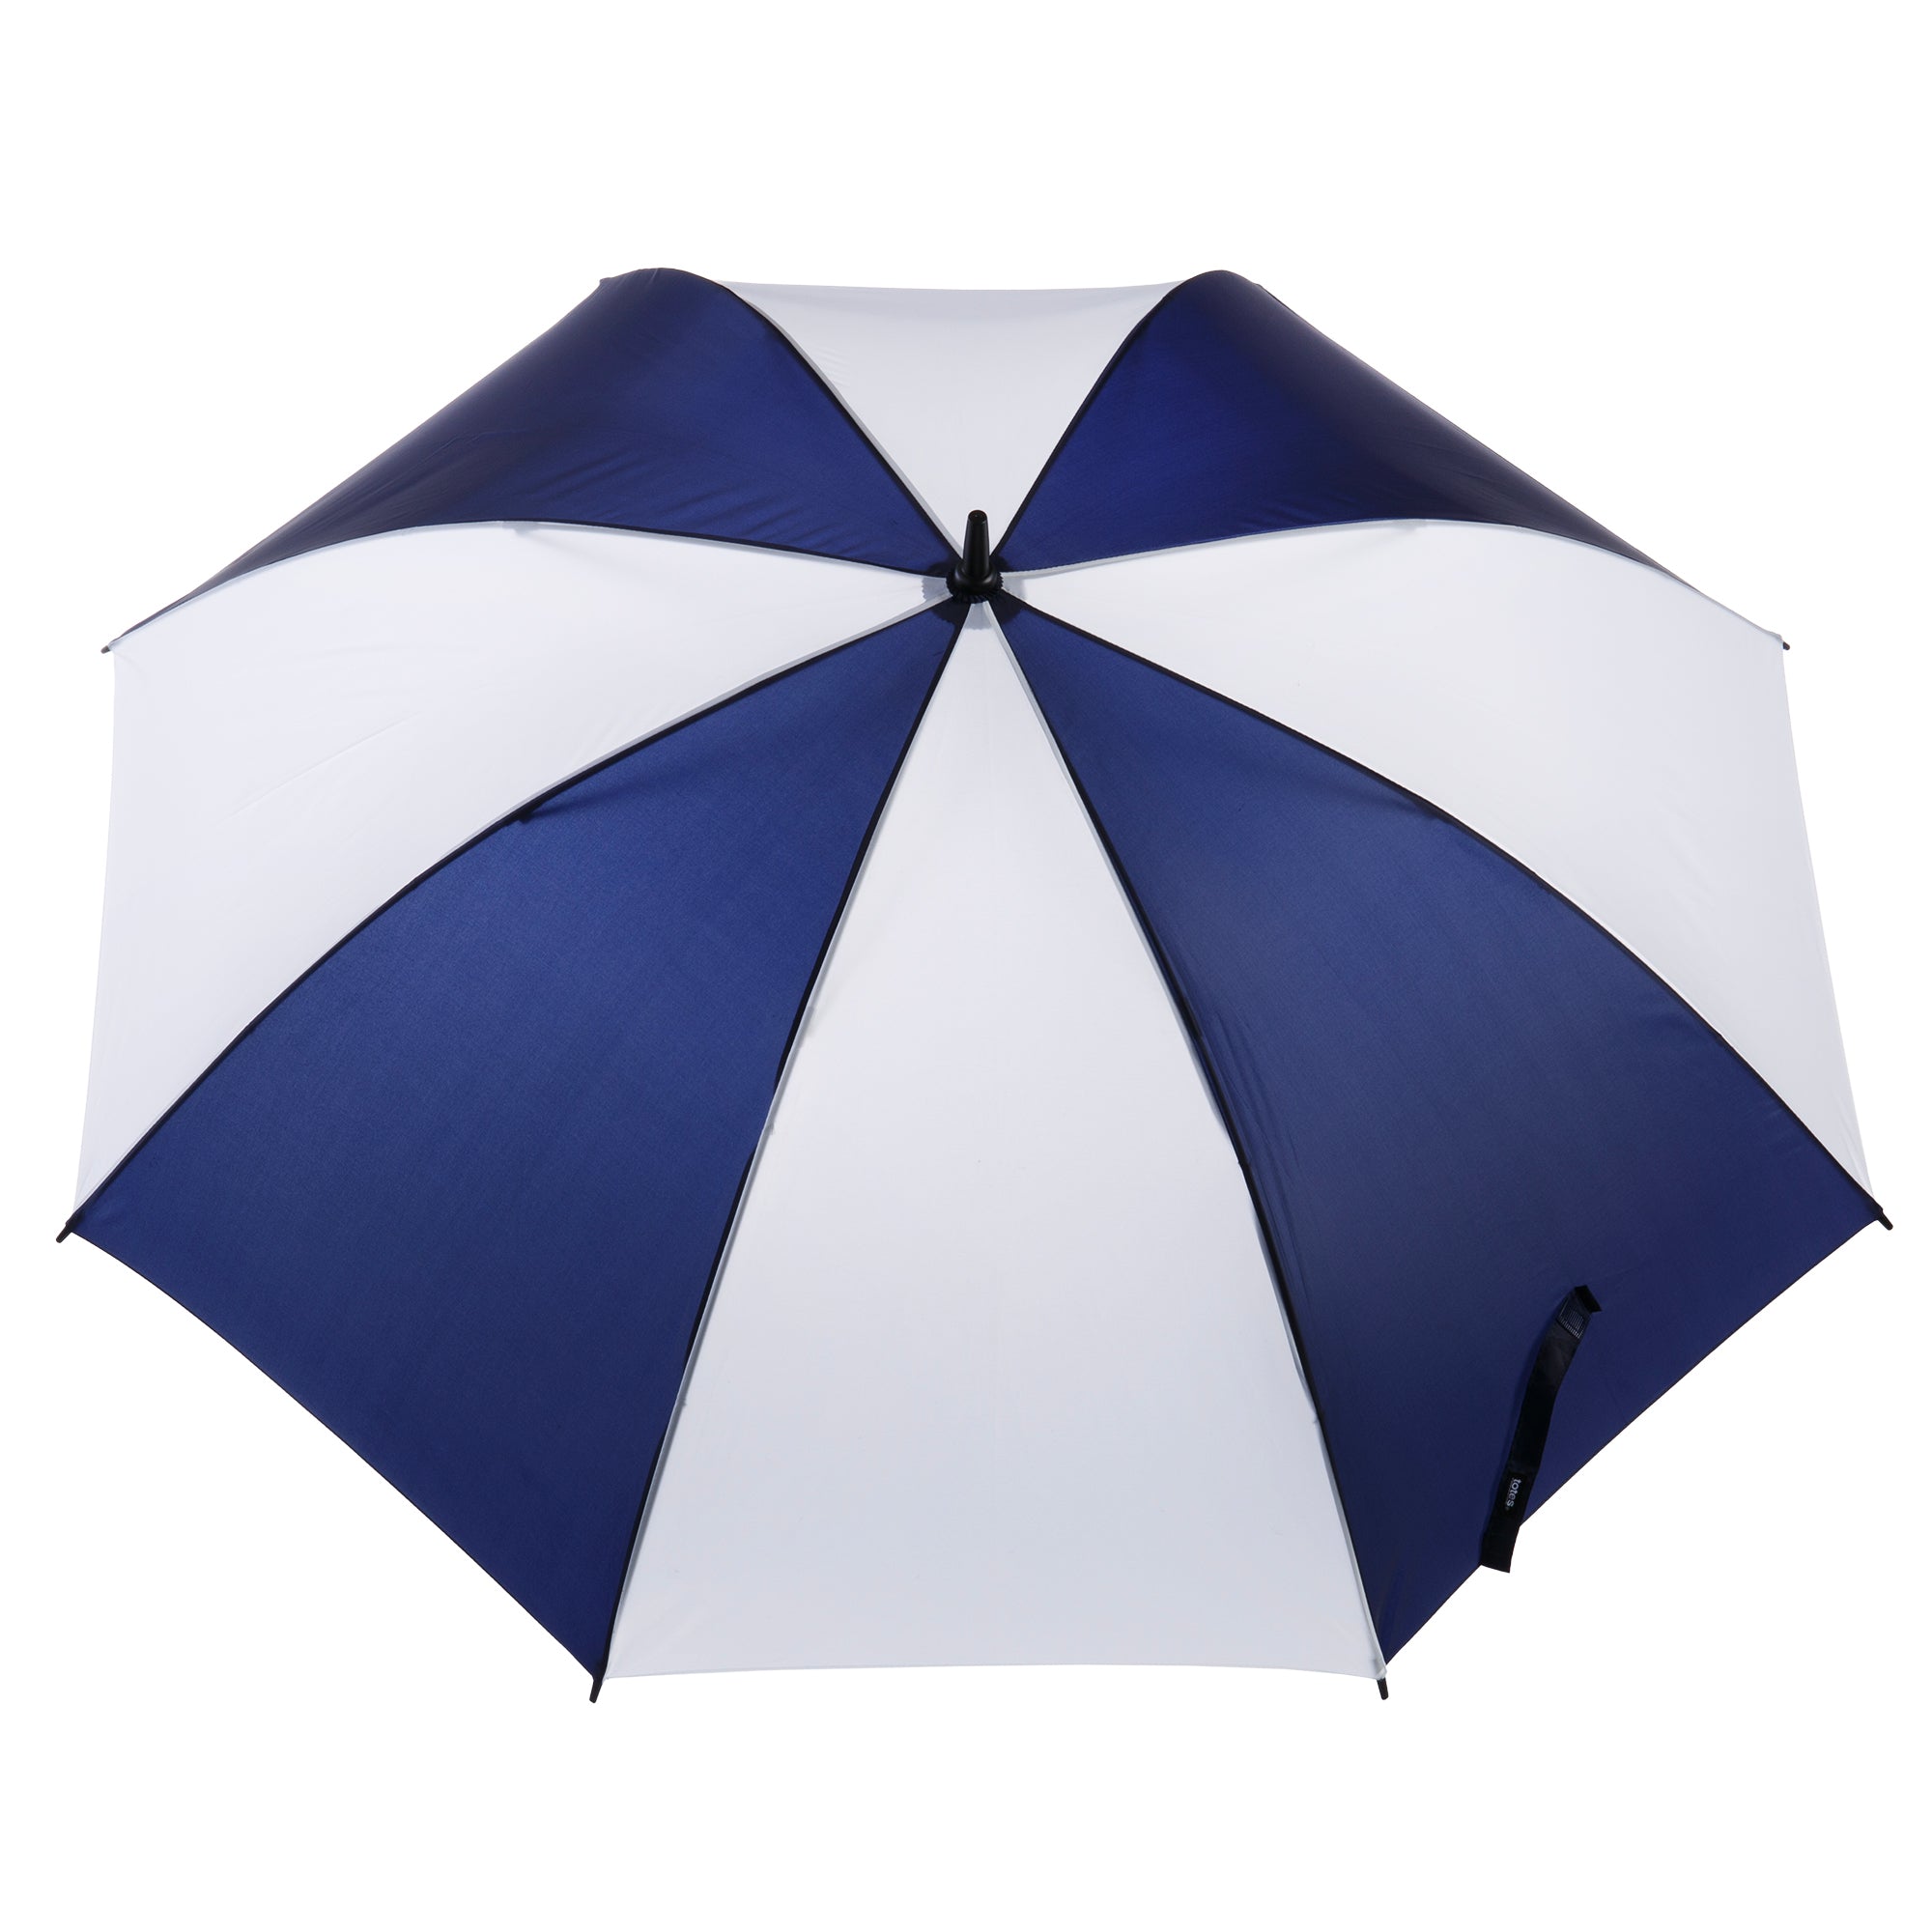 Recycled Golf Stick Umbrella with Auto Open and Sunguard Technology